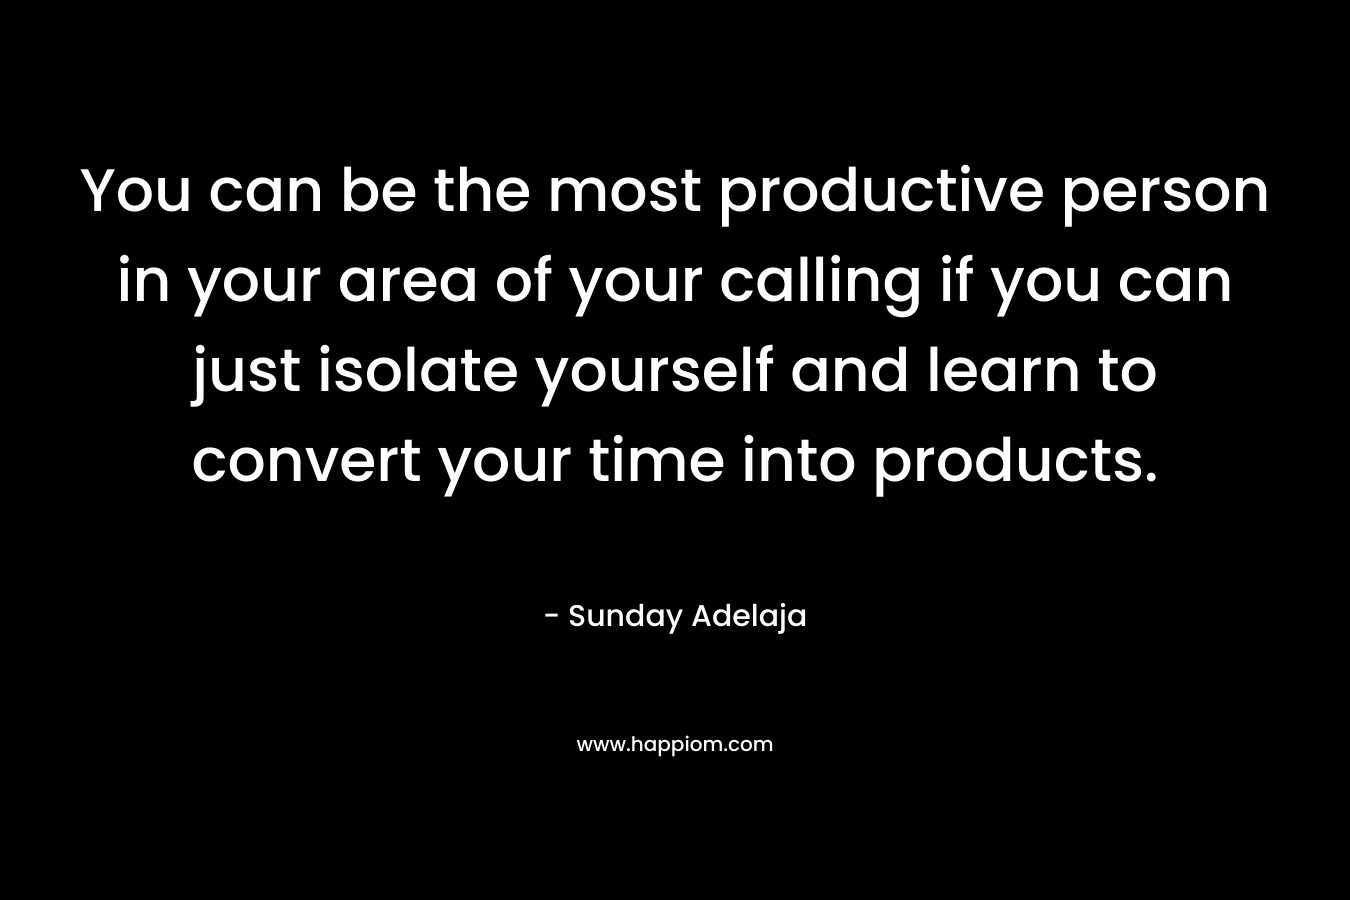 You can be the most productive person in your area of your calling if you can just isolate yourself and learn to convert your time into products. – Sunday Adelaja